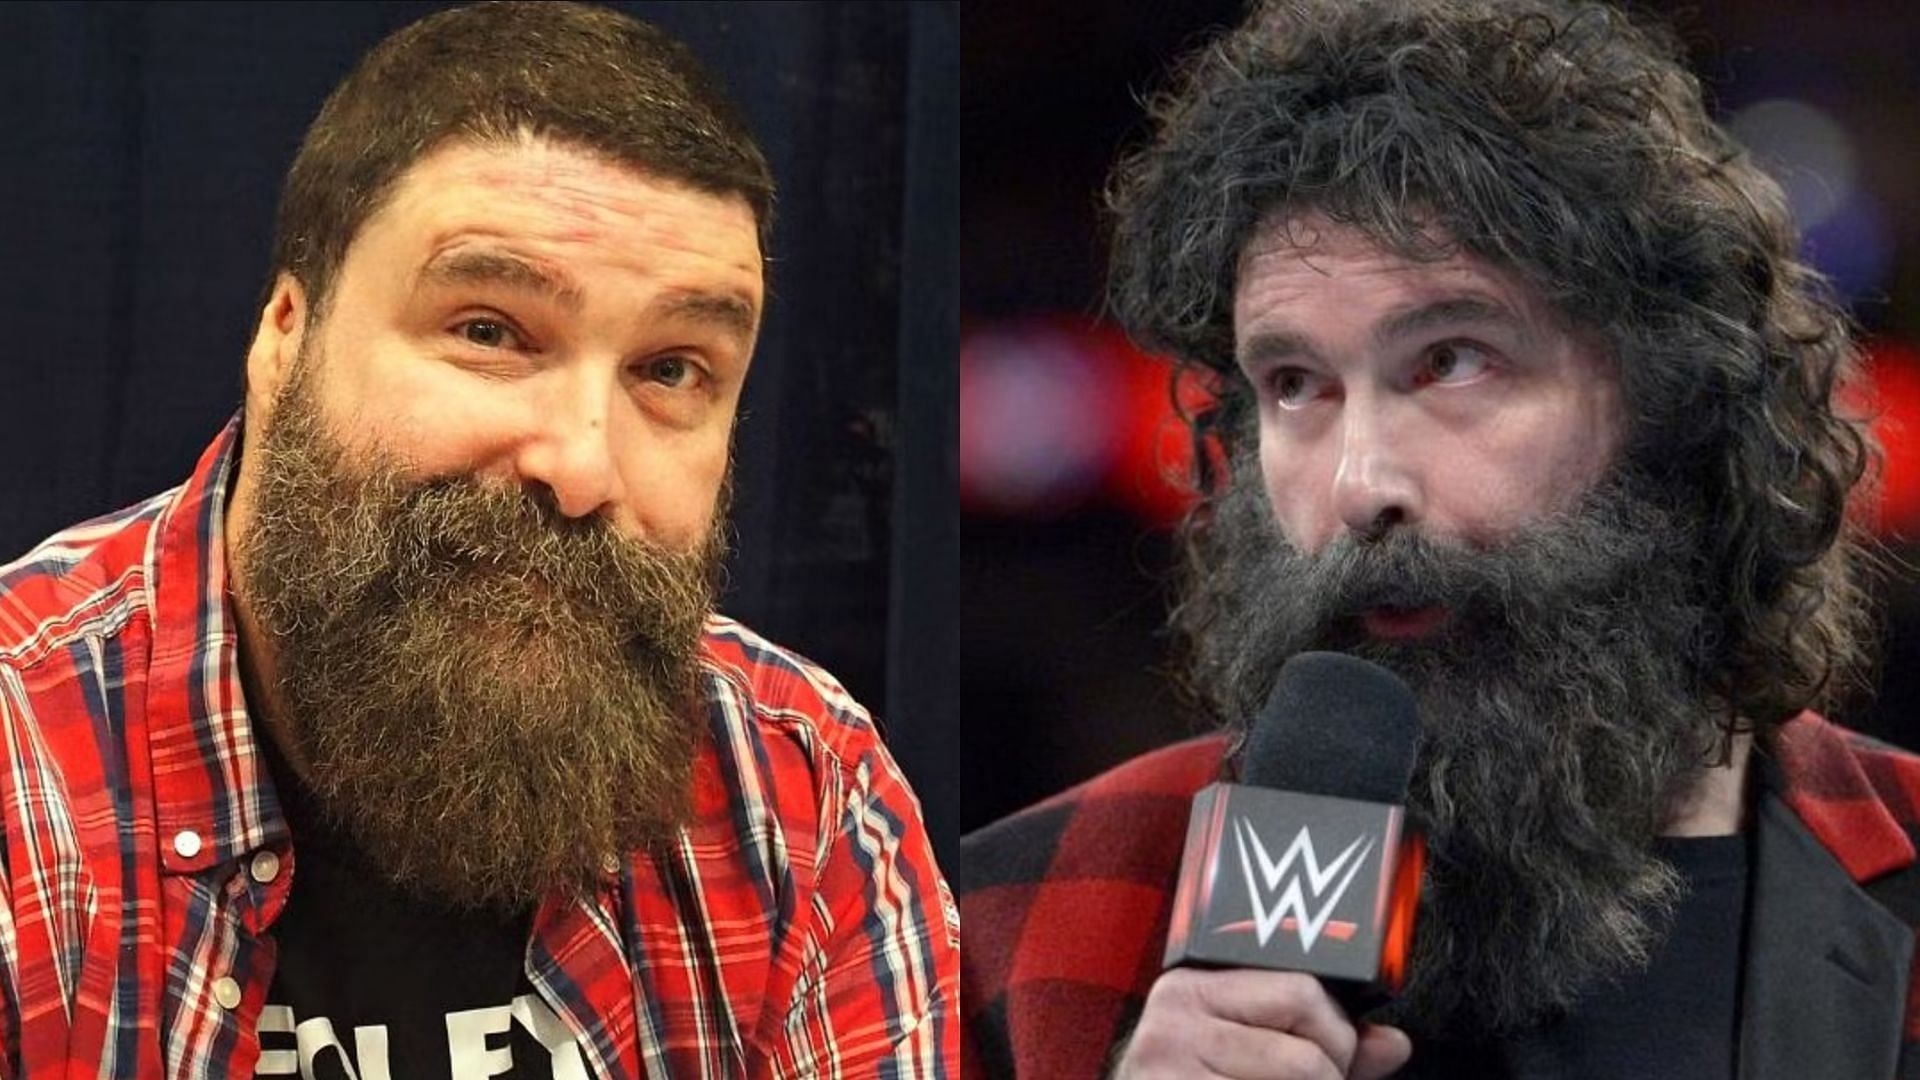 Mick Foley was inducted into the WWE Hall of Fame in 2013.